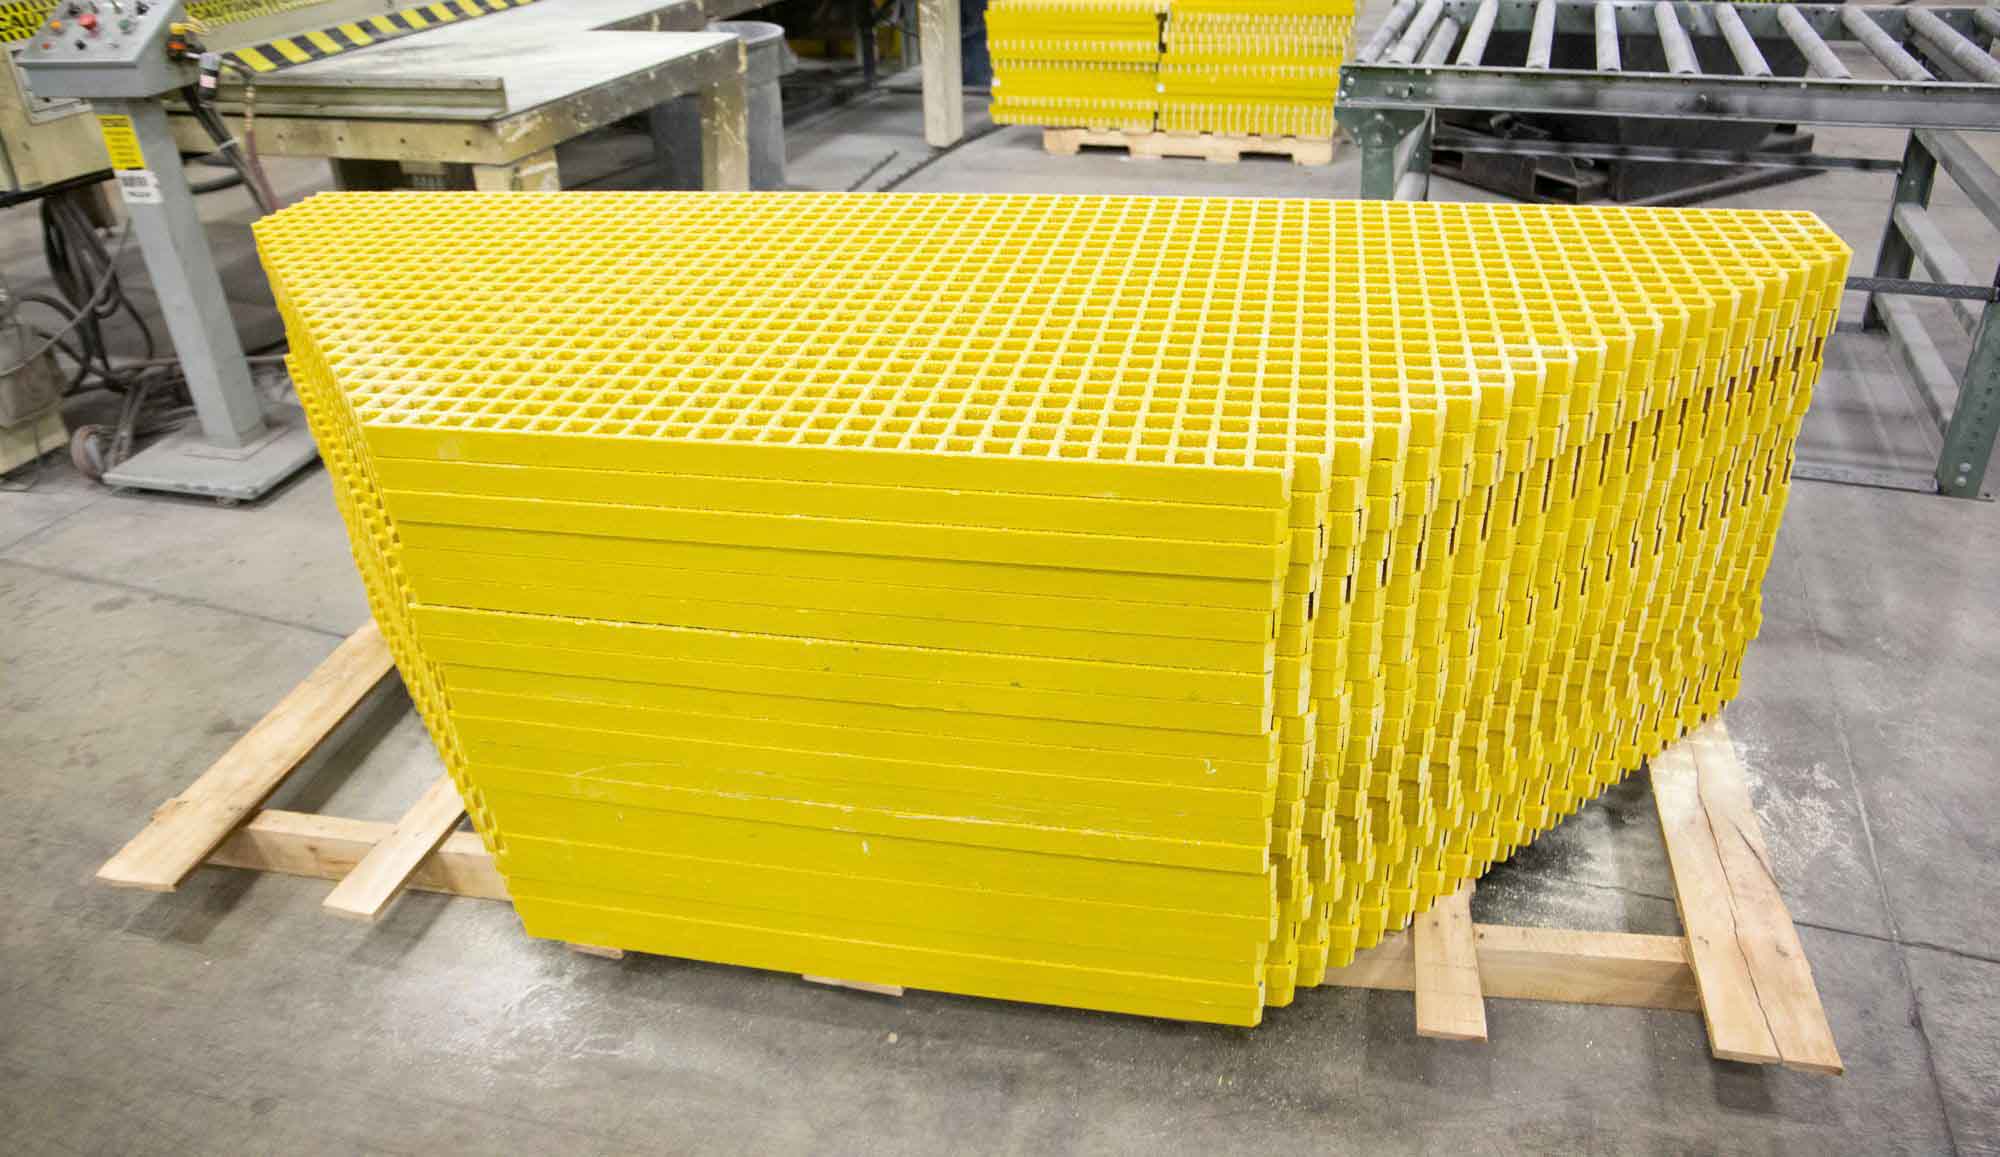 A large stack of yellow Fiberglass Grating that has been cut-to-size.